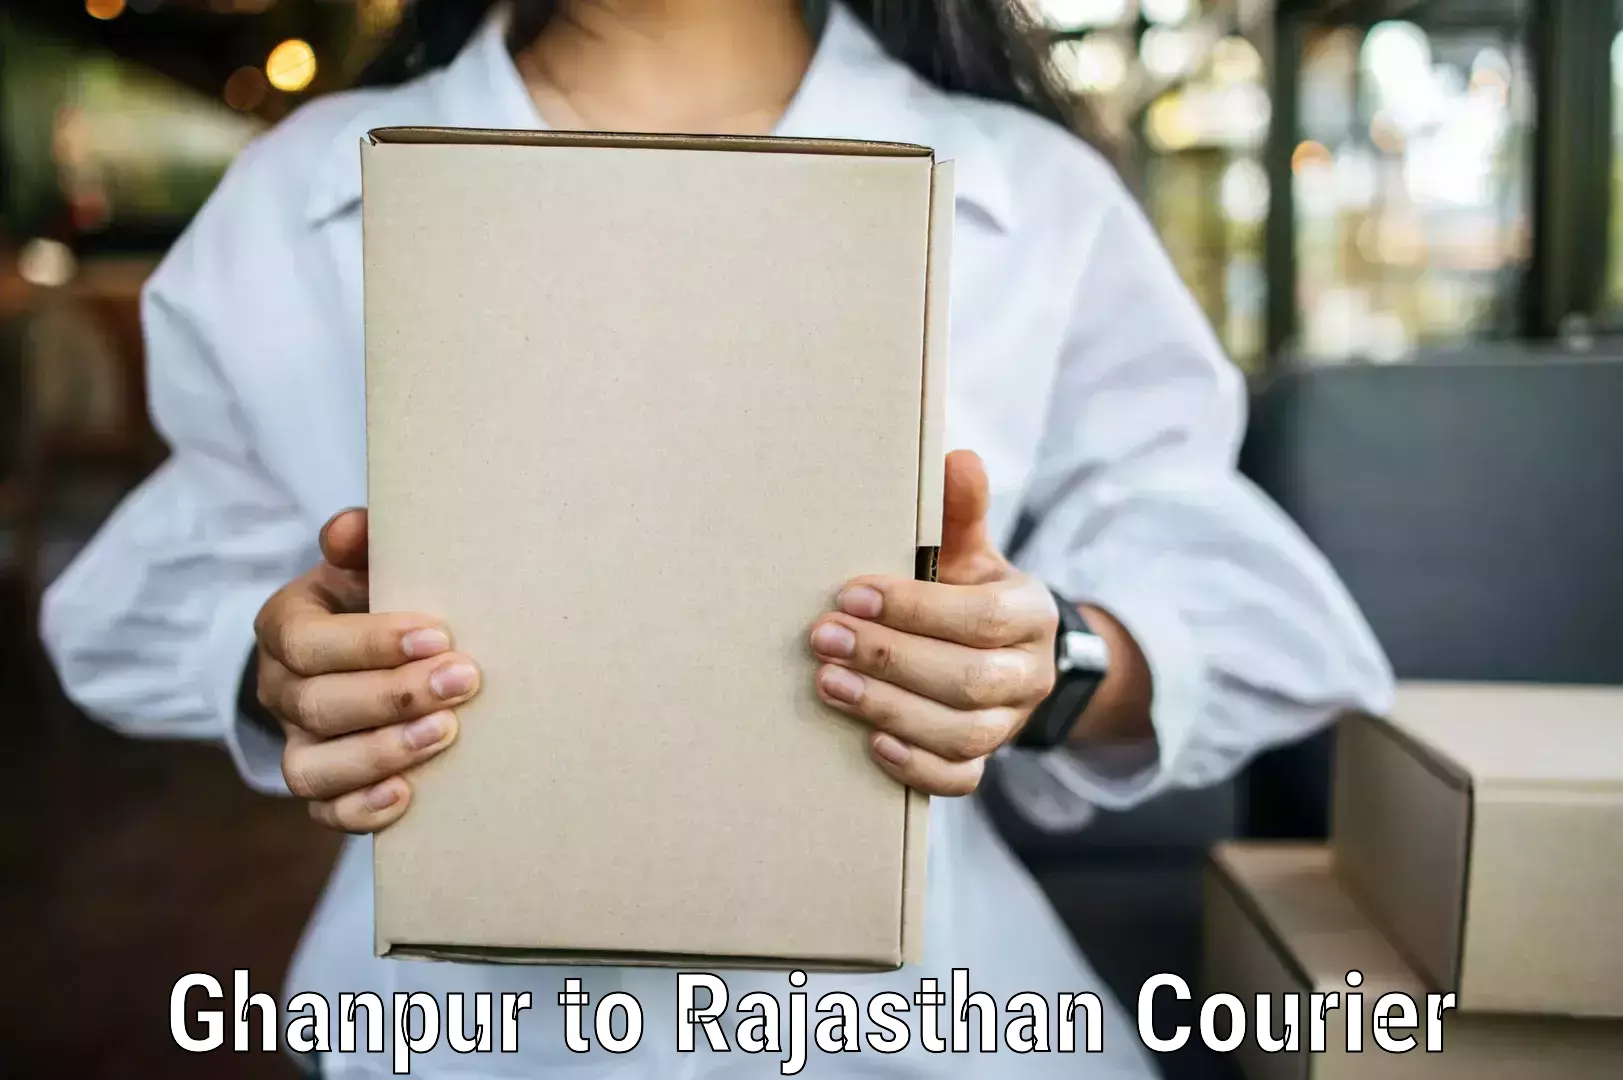 State-of-the-art courier technology Ghanpur to Kota